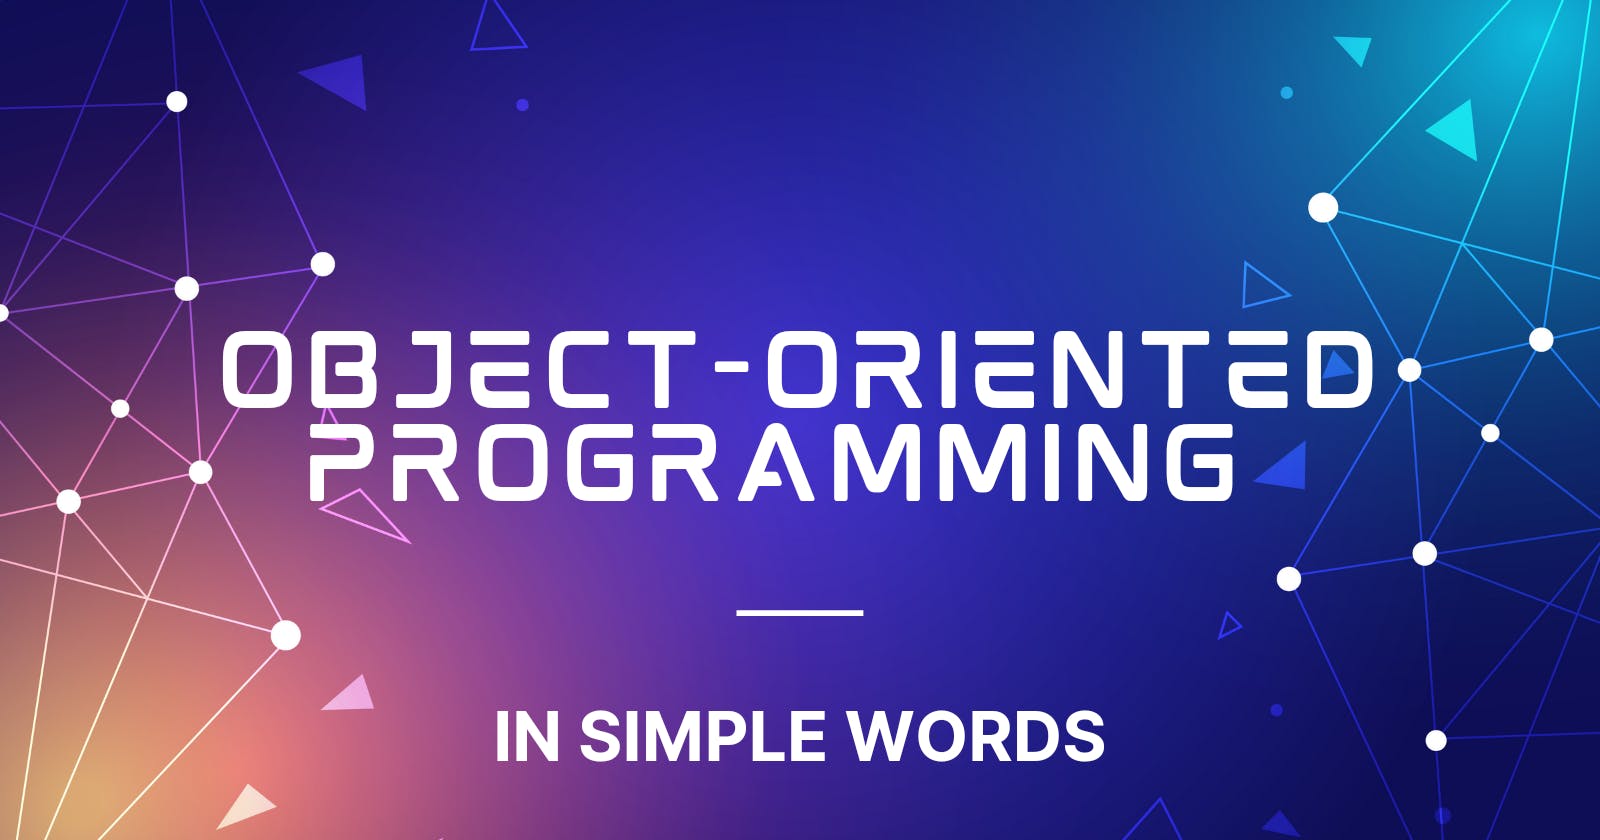 Simplified Object Oriented Programming (OOPs) Concept.